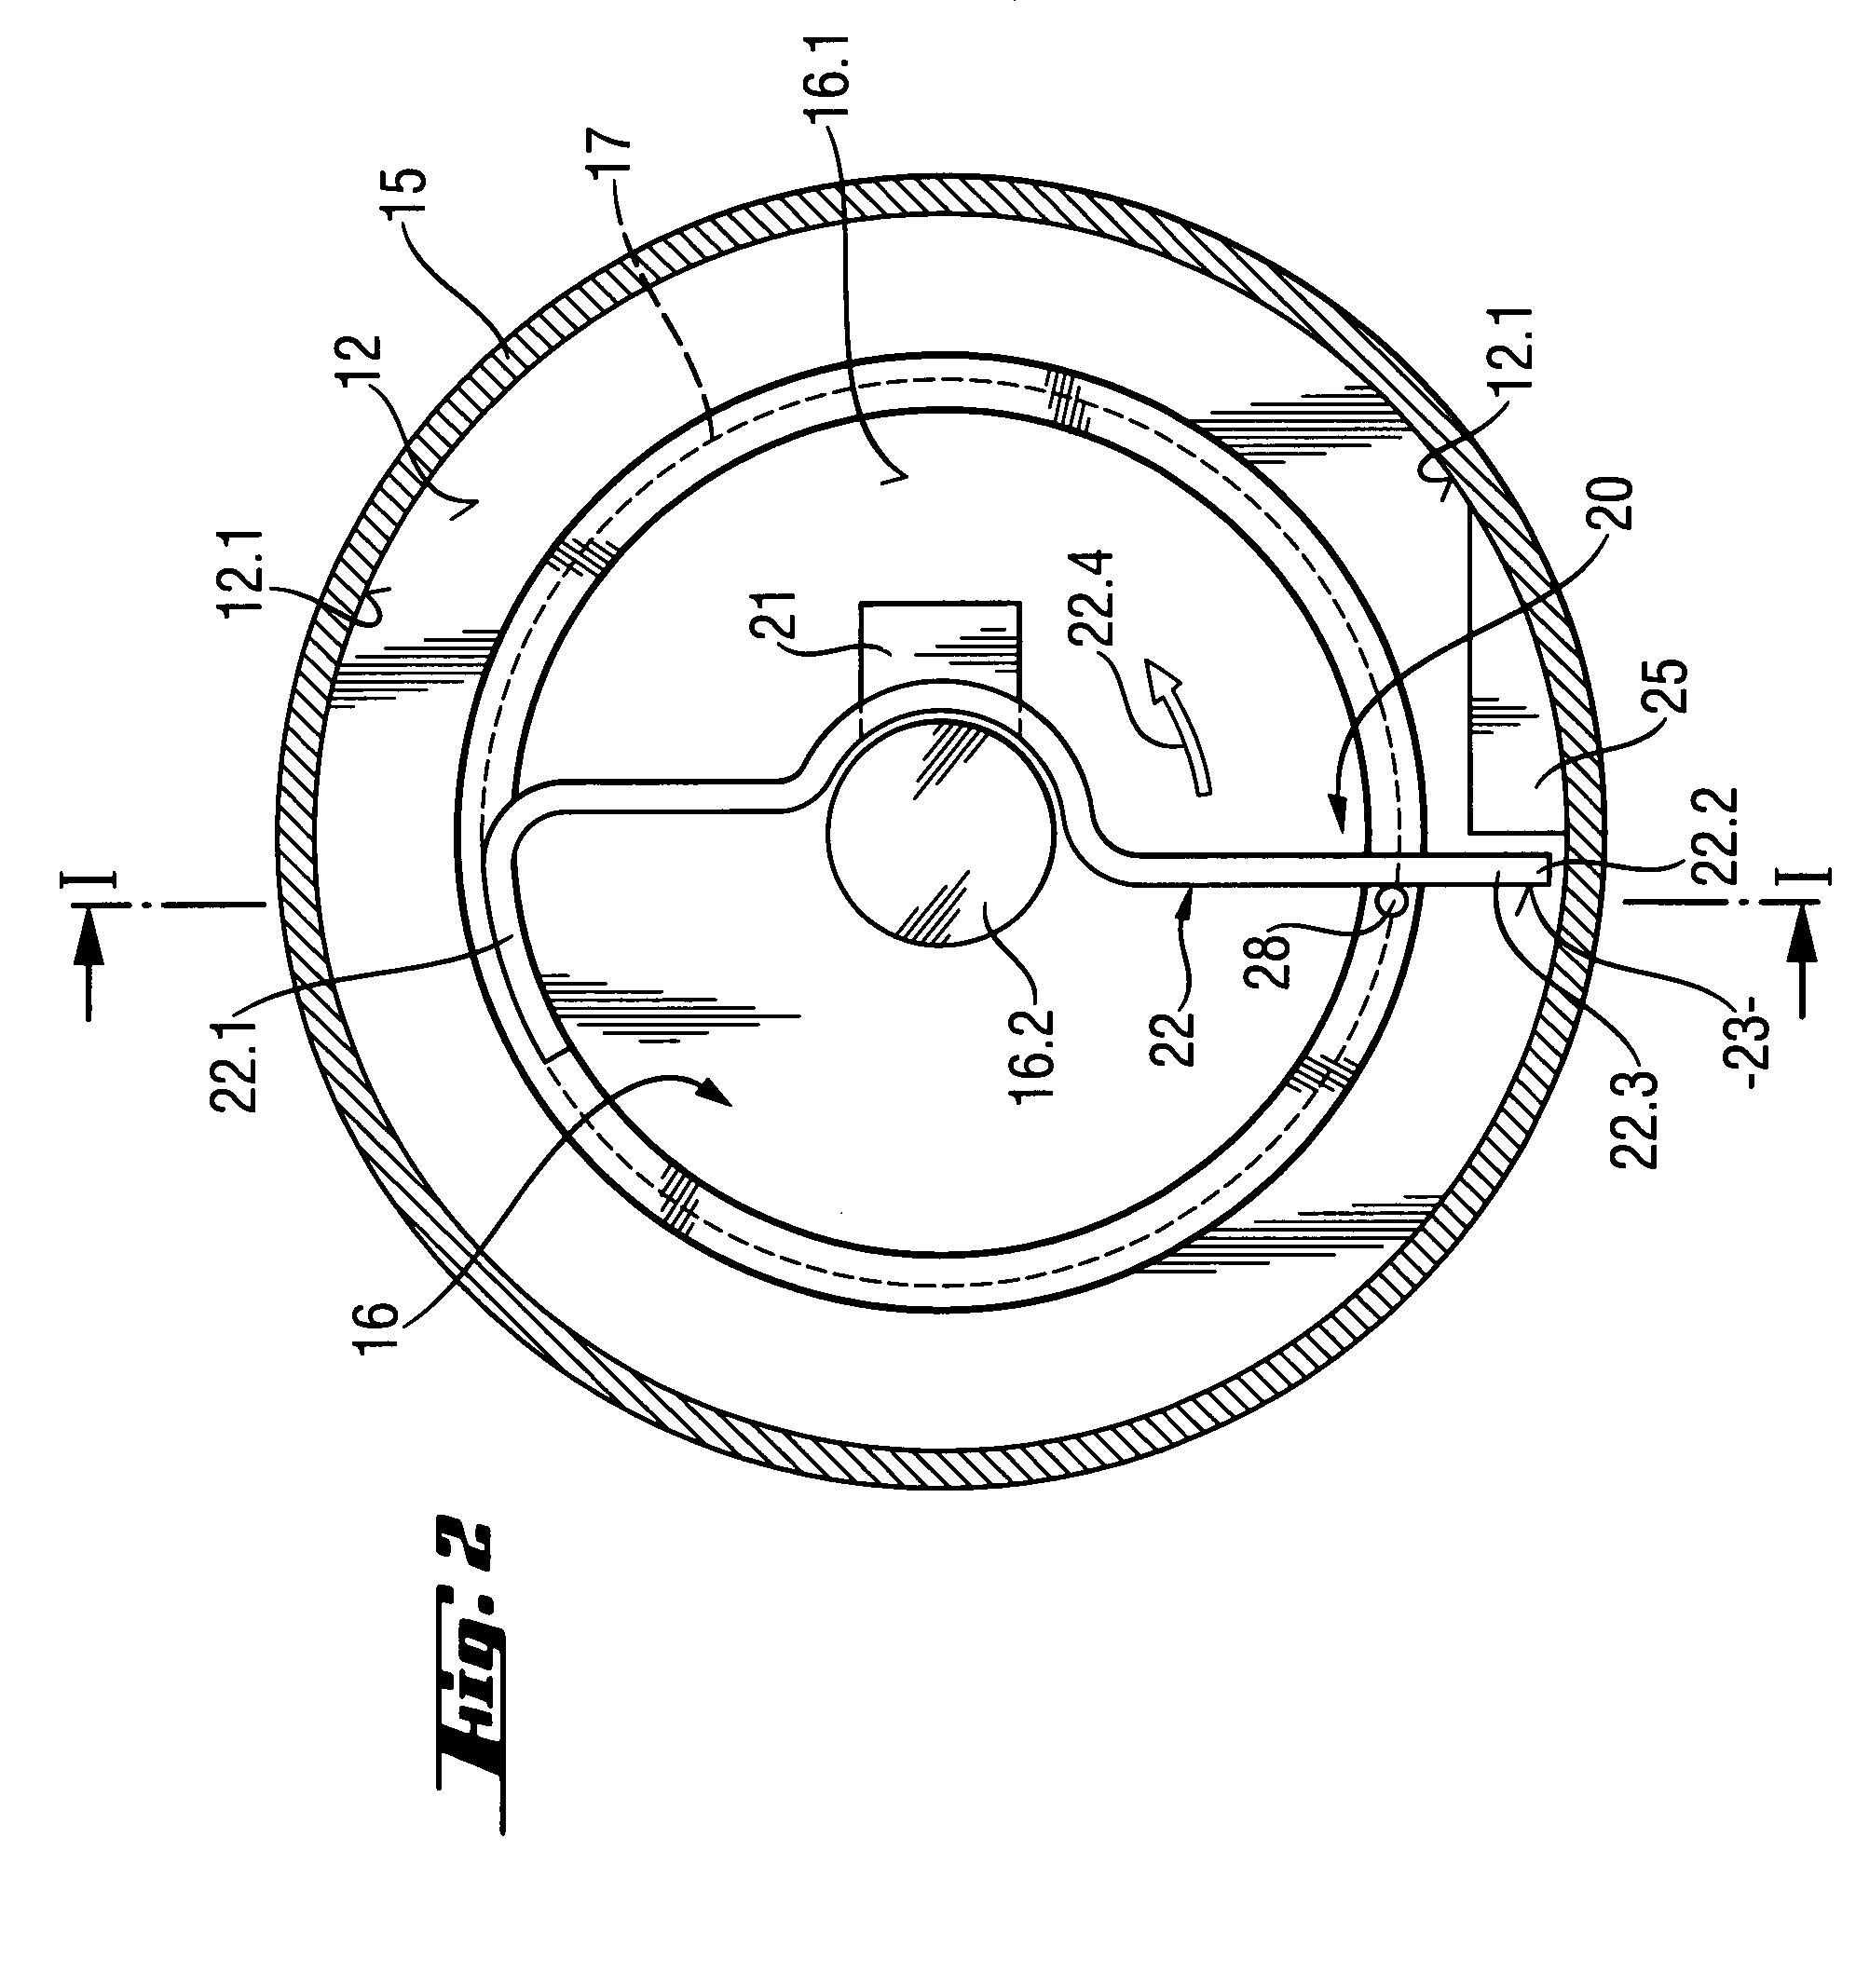 Combustion-operated setting device